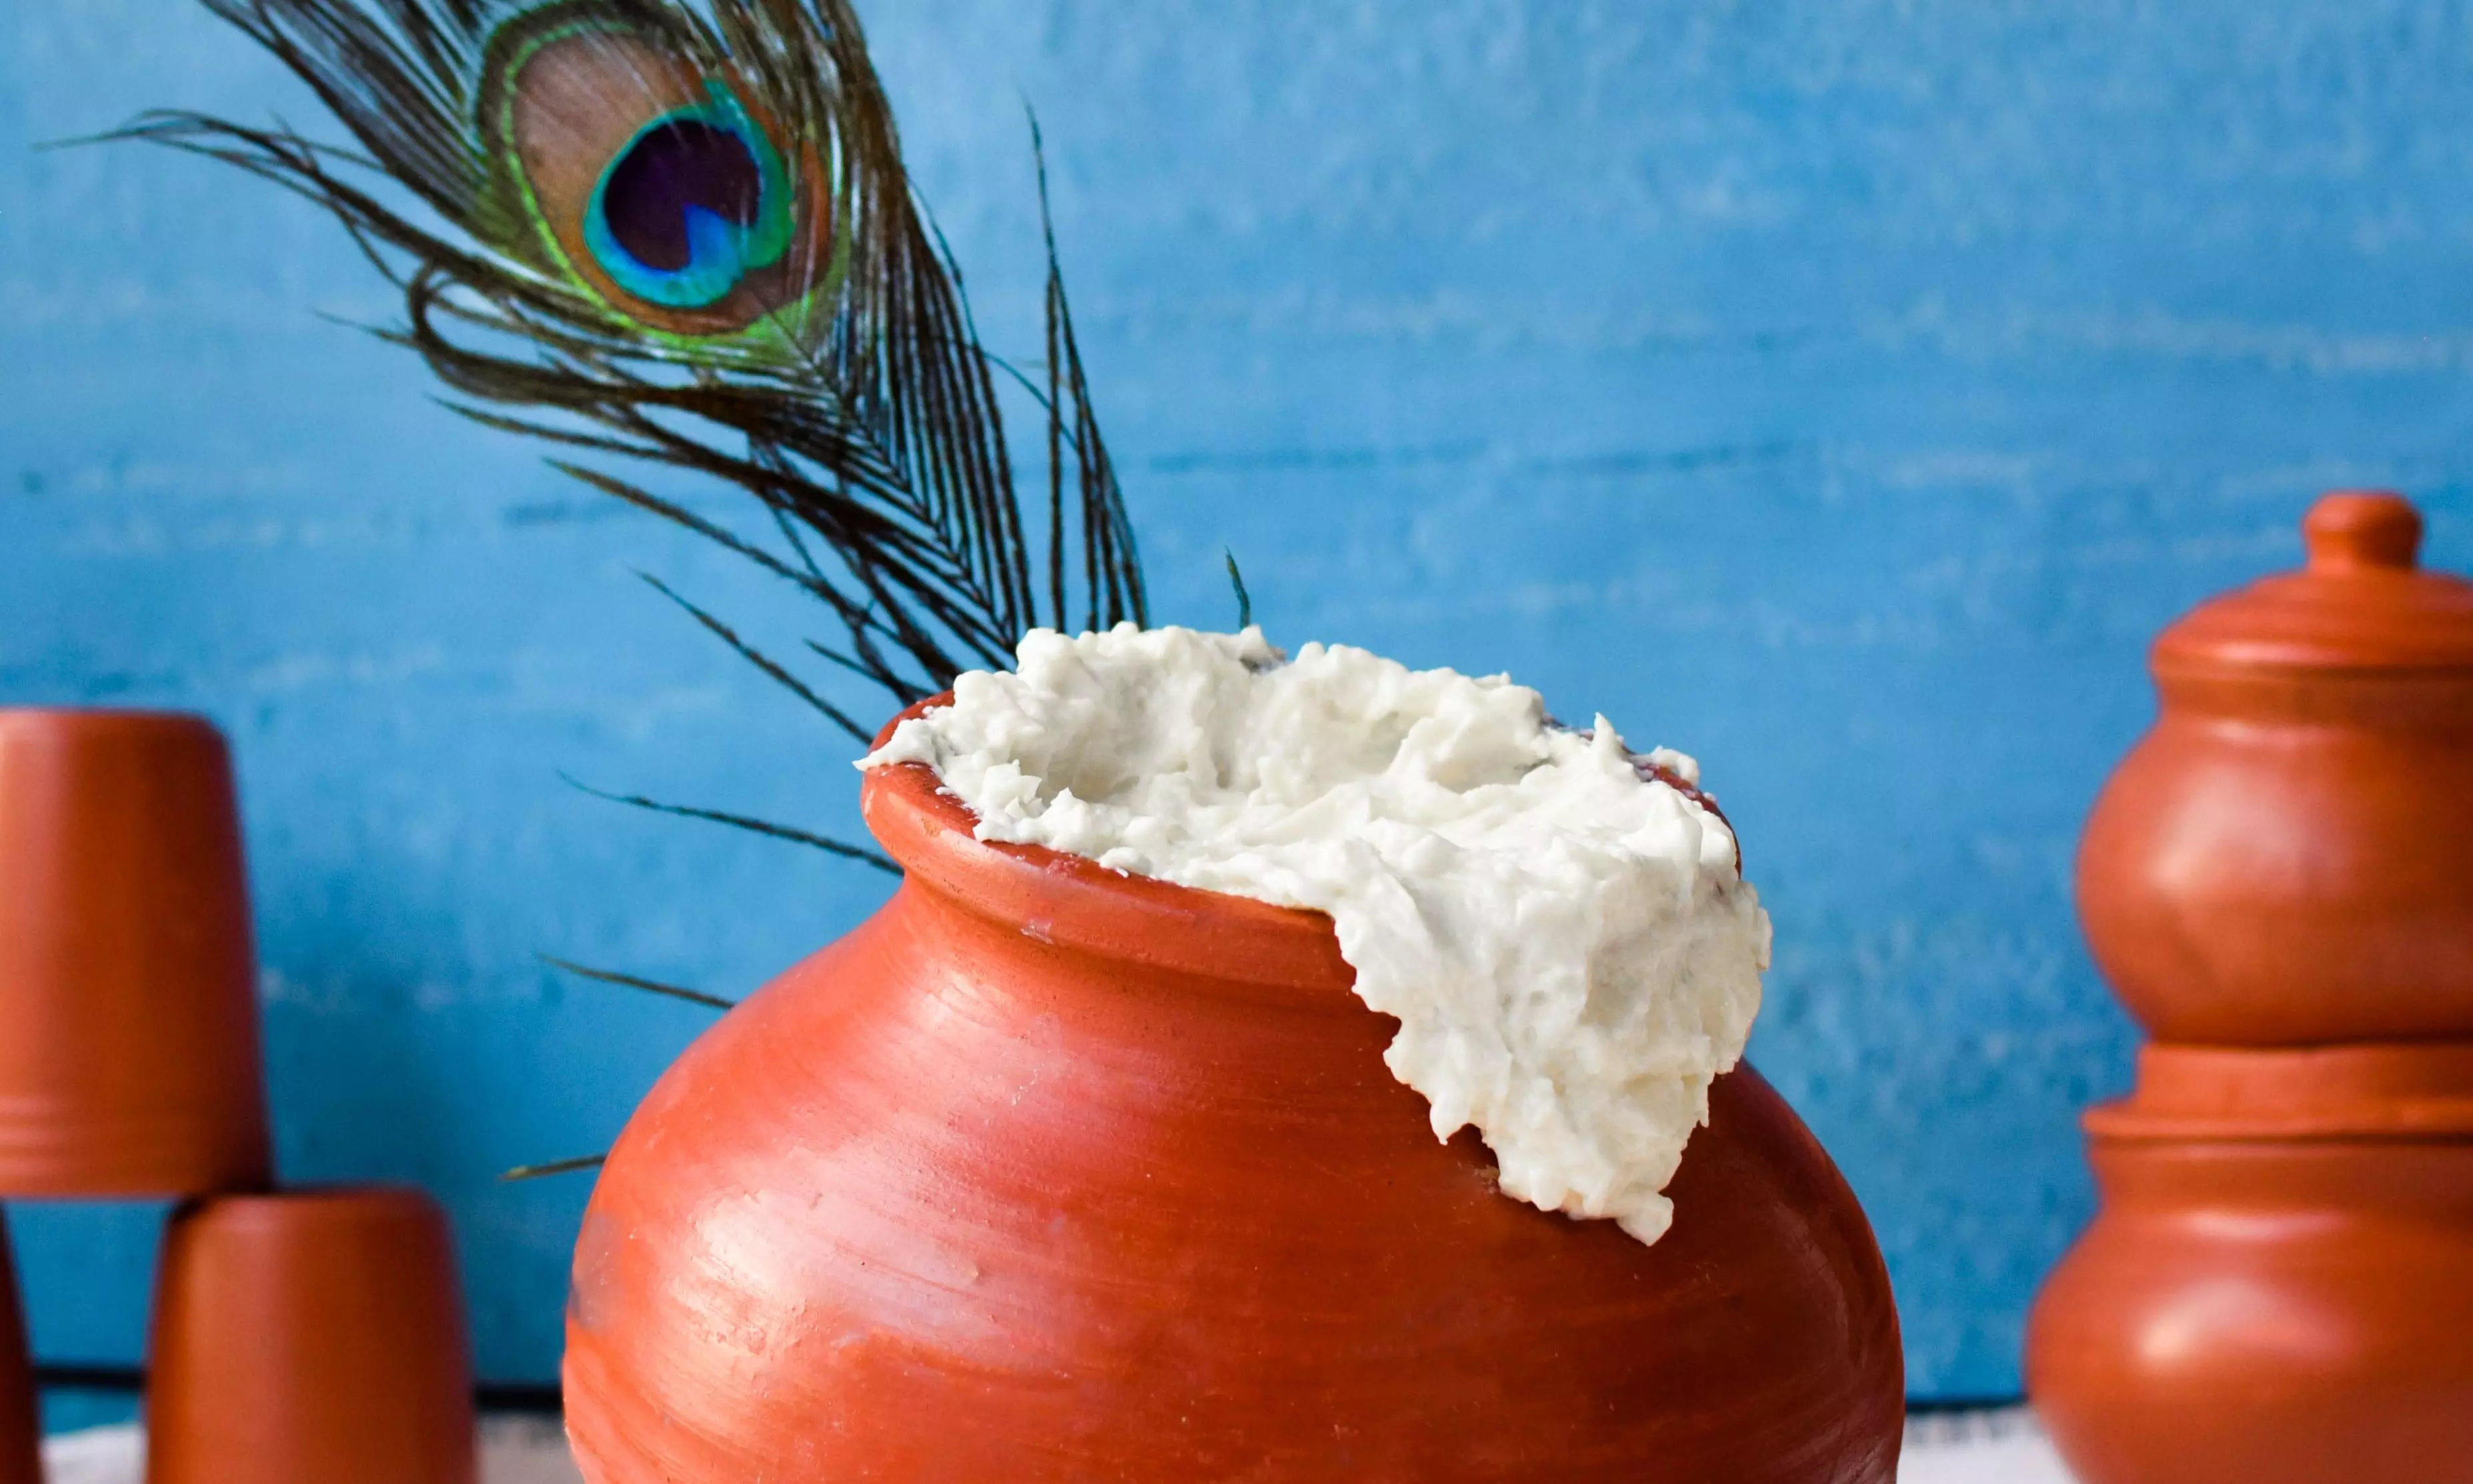 Because Lord Krishna was a gourmand, here are 5 recipes to celebrate Janmashtami with